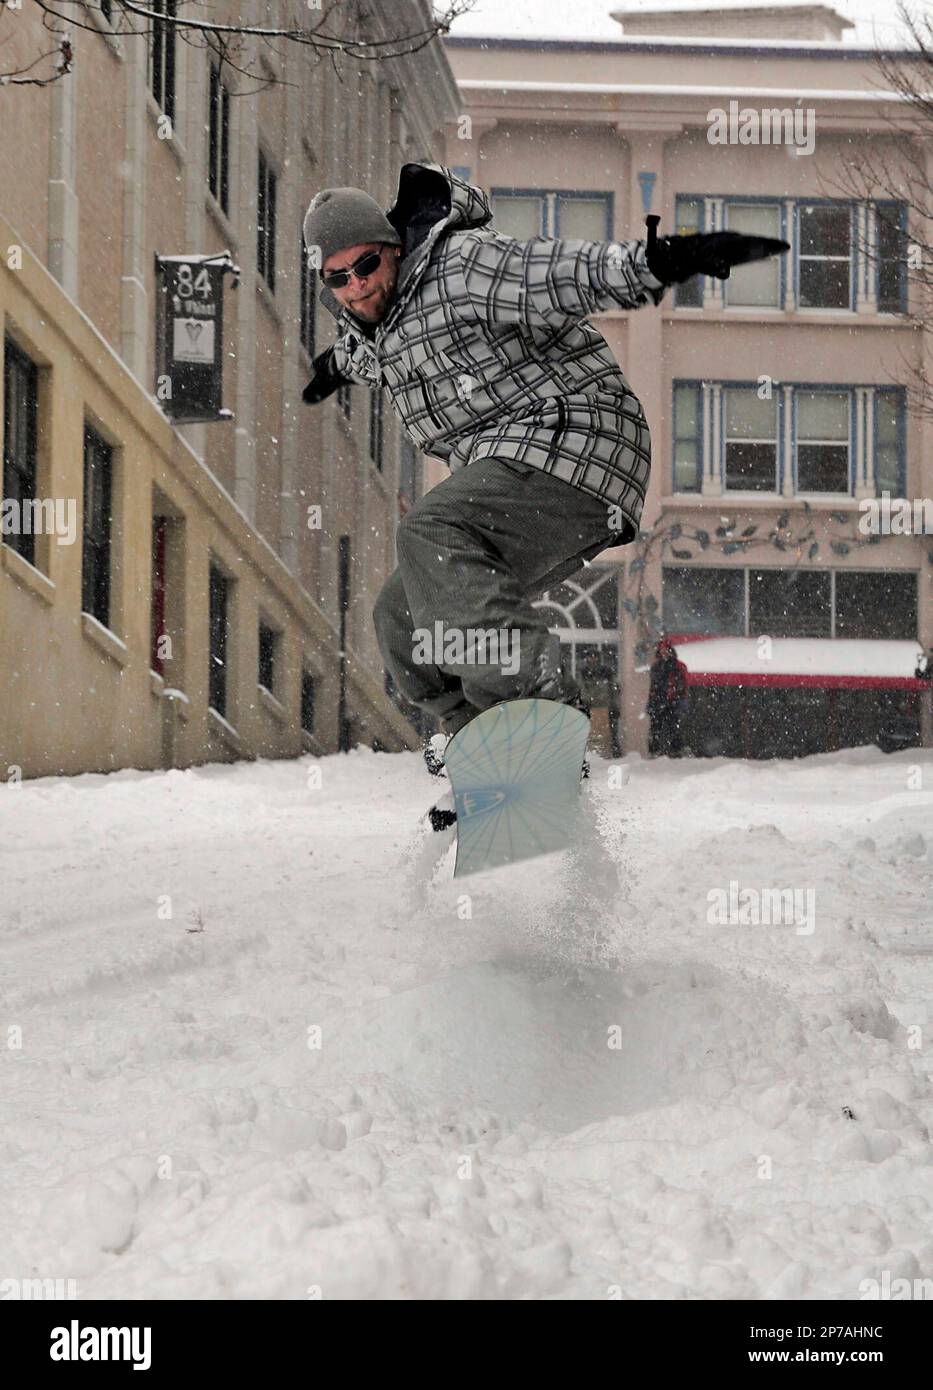 Todd Kriedt, of Asheville, N.C., gets airborne as he snow boards down  Walnut Street in downtown Asheville Monday, January 10, 2011. Asheville was  blanketed by 10 inches of snow Monday. (AP Photo/The